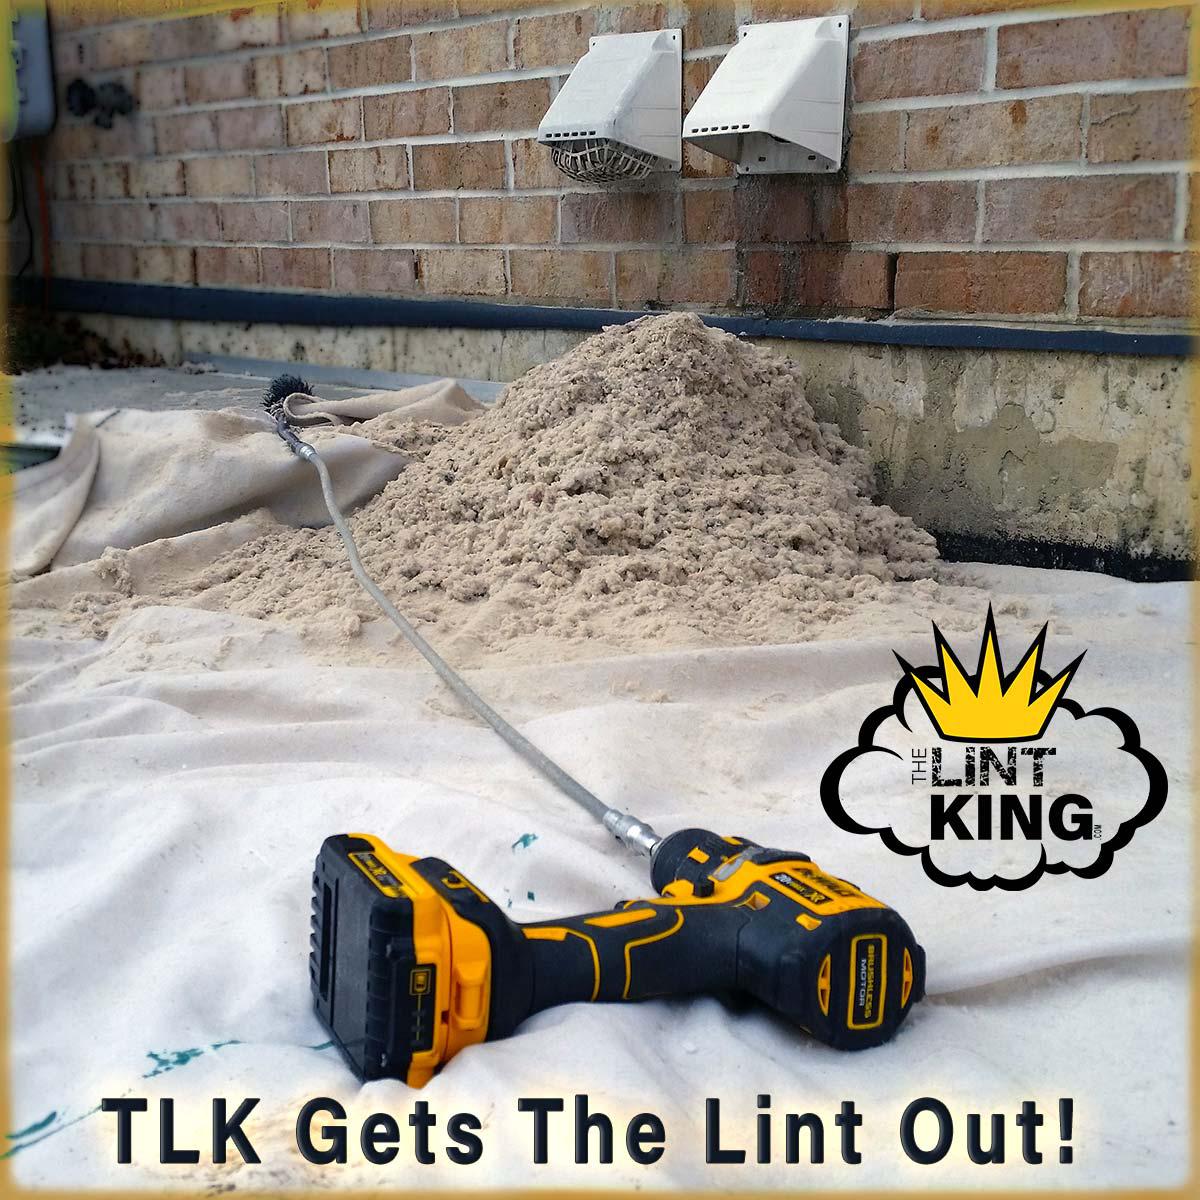 The lint king Dryer - Vent Cleaning Experts Serving Northern Illinois.